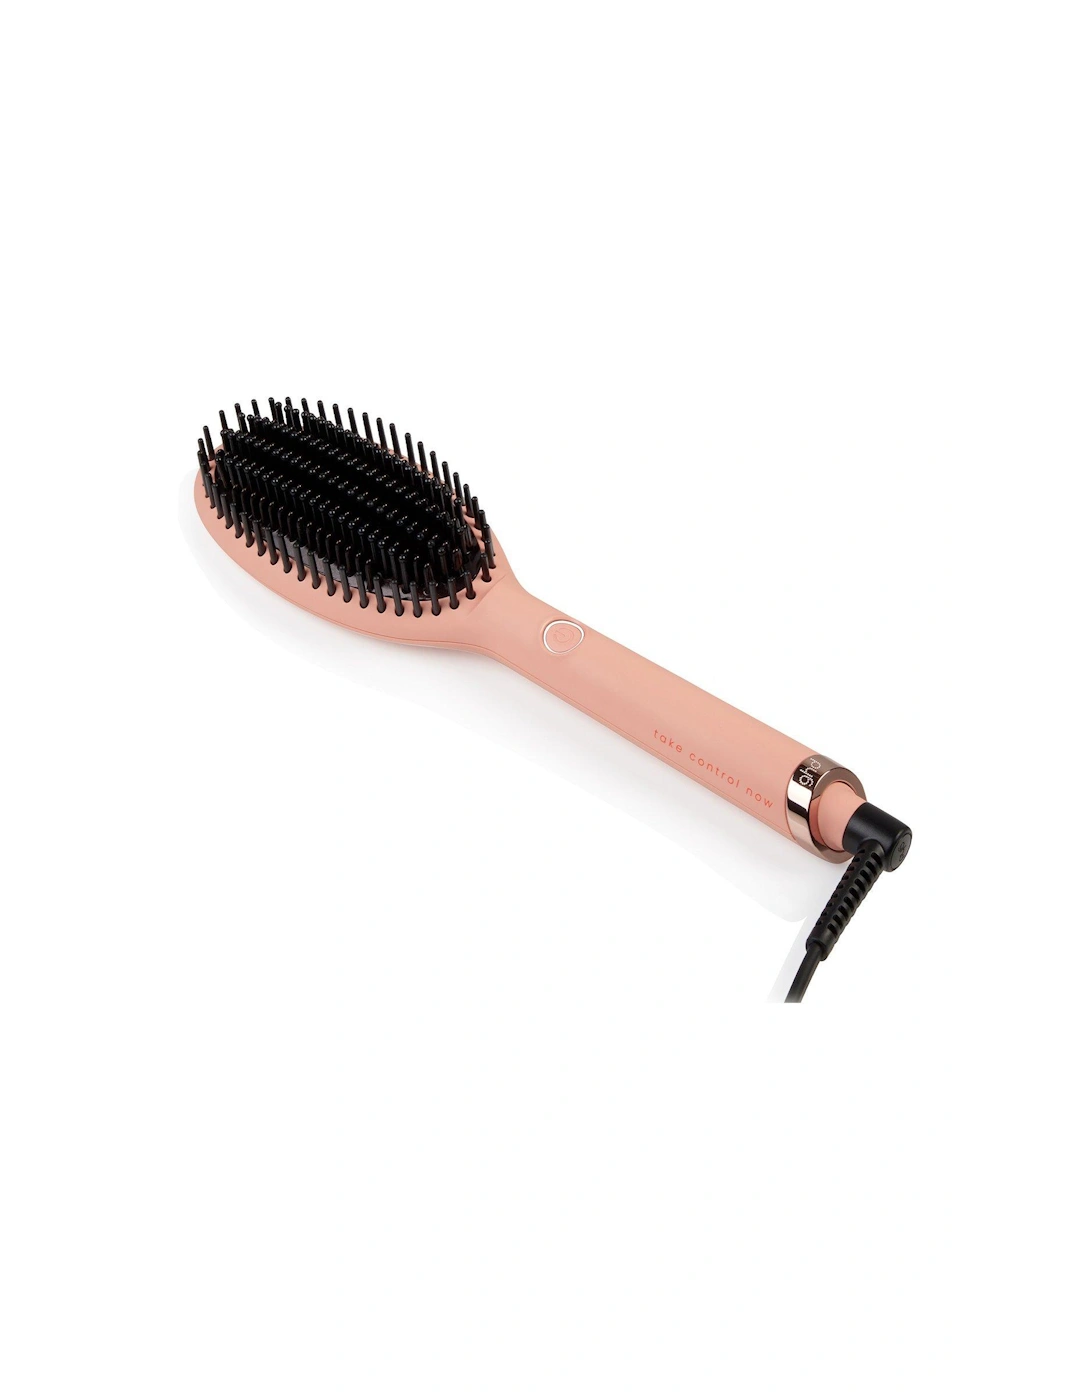 Glide Limited Edition Hot Brush - Pink Peach Charity Edition